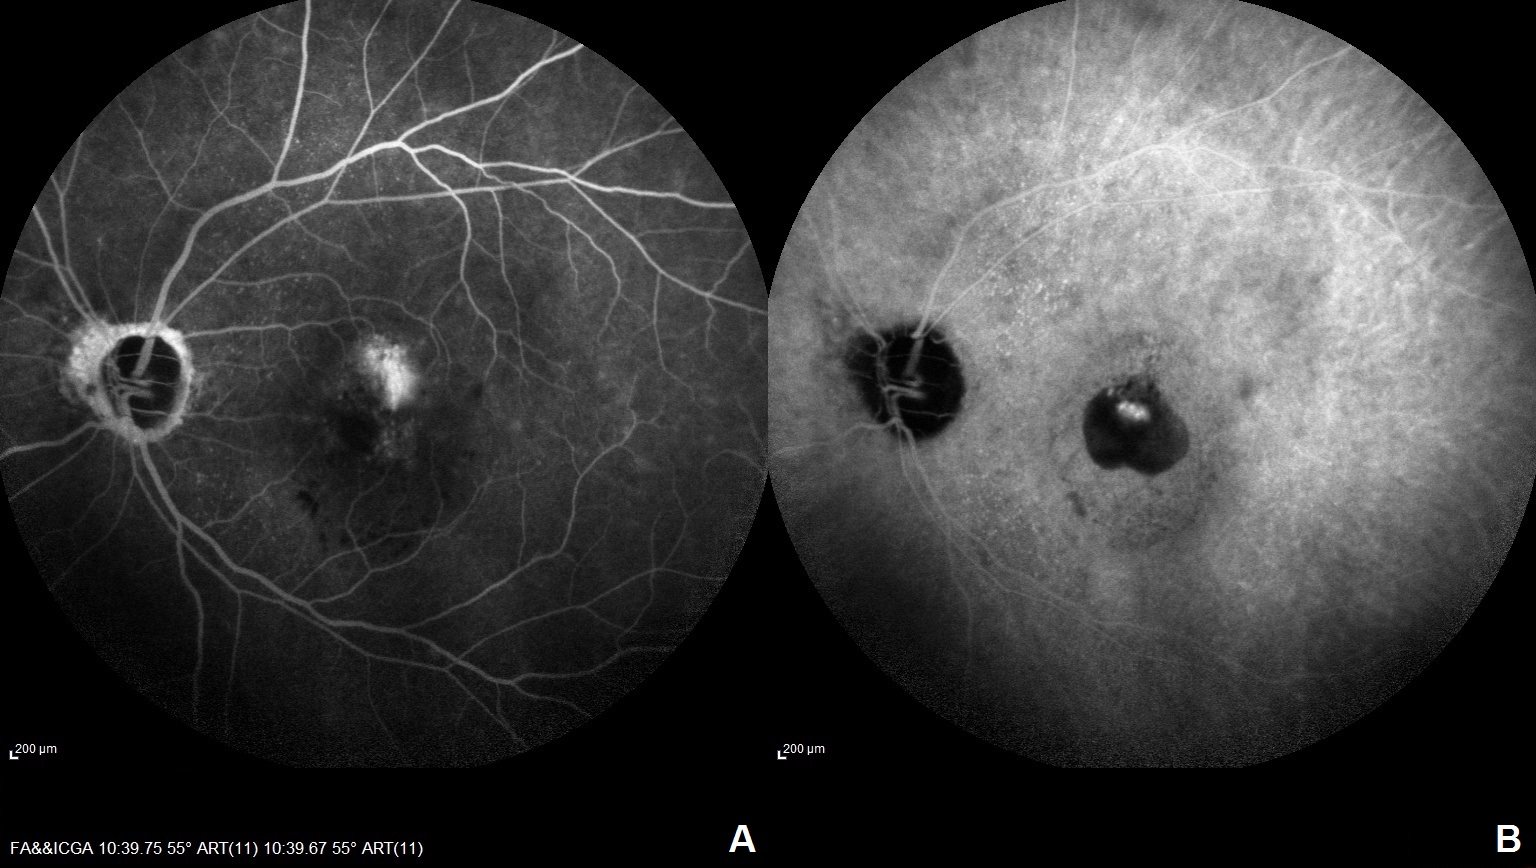 FA (A) and ICGA (B) of the left eye of a patient with PCV